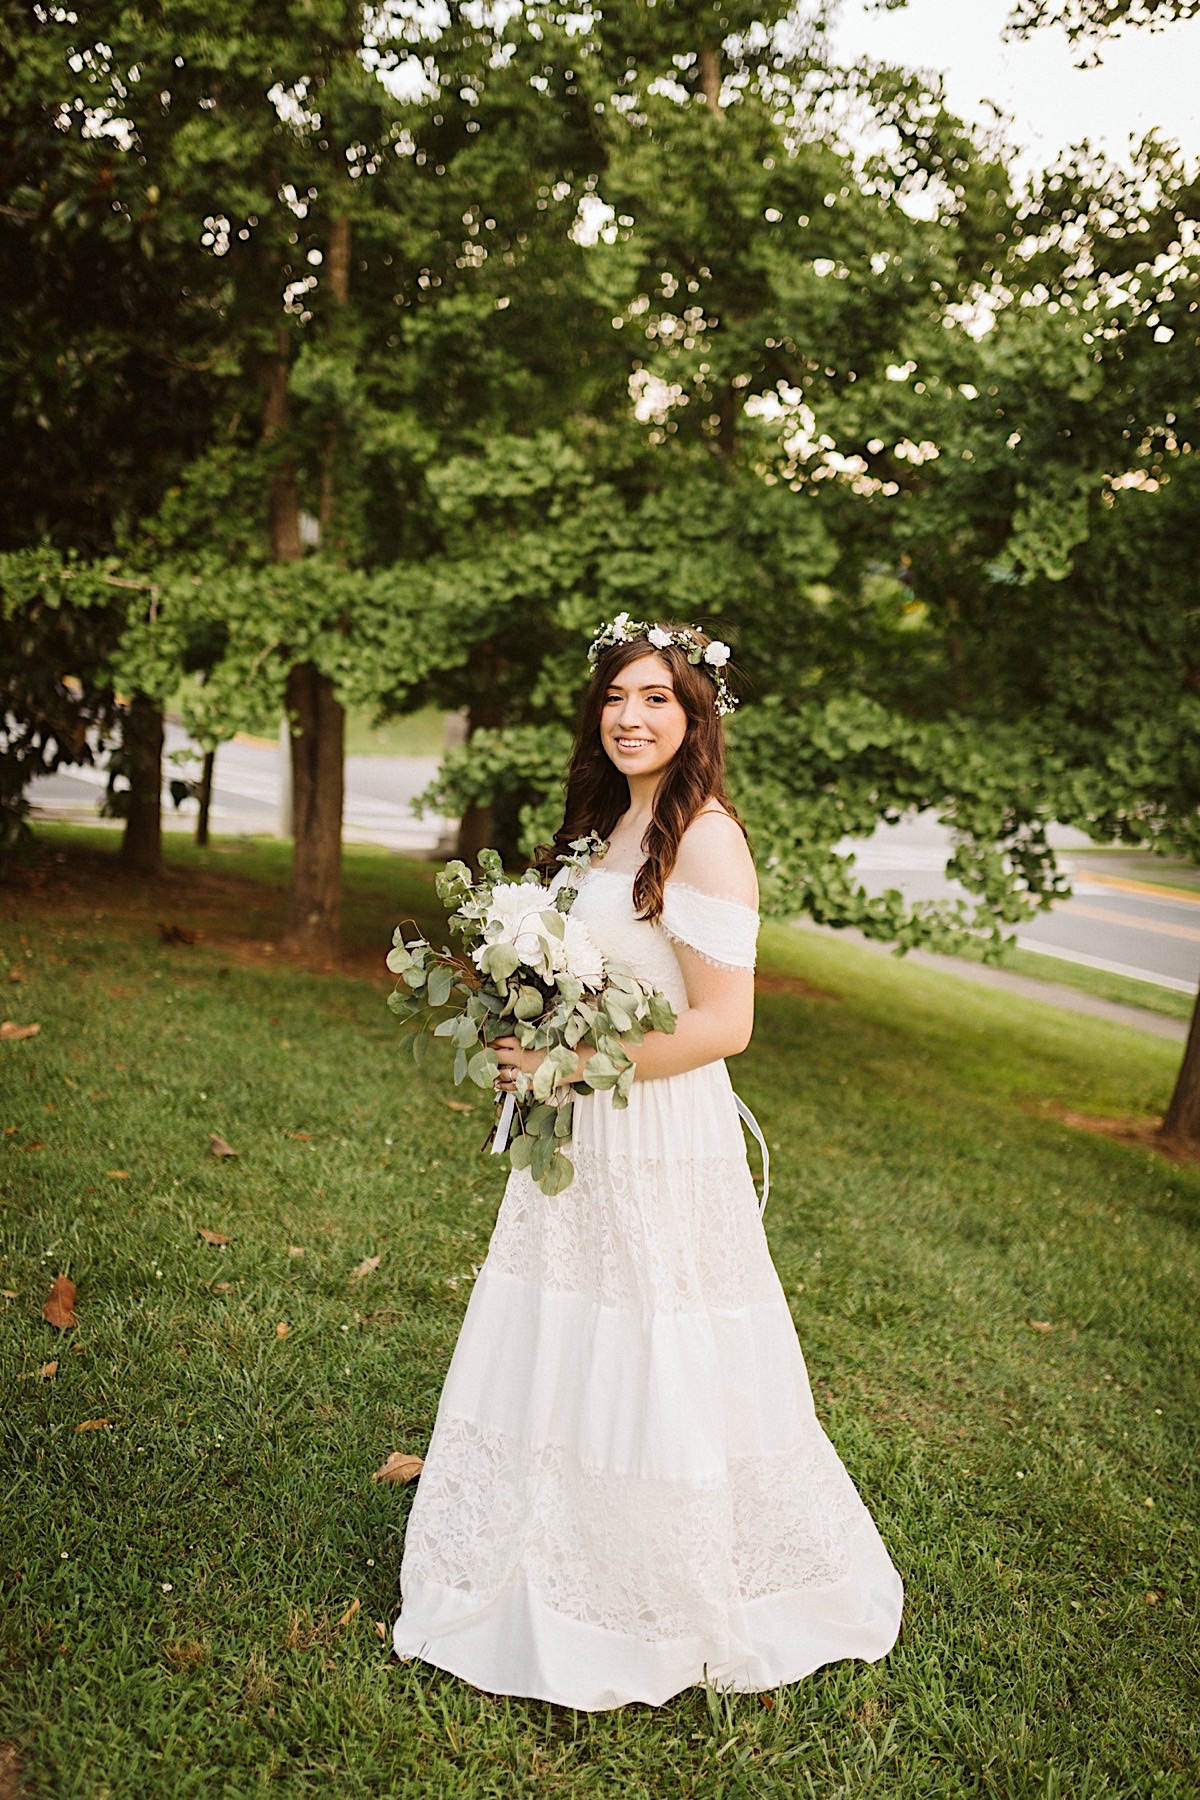 Bride wears a lacy white gown and white flower crown in her dark hair. She holds white floral bouquet and eucalyptus greens.